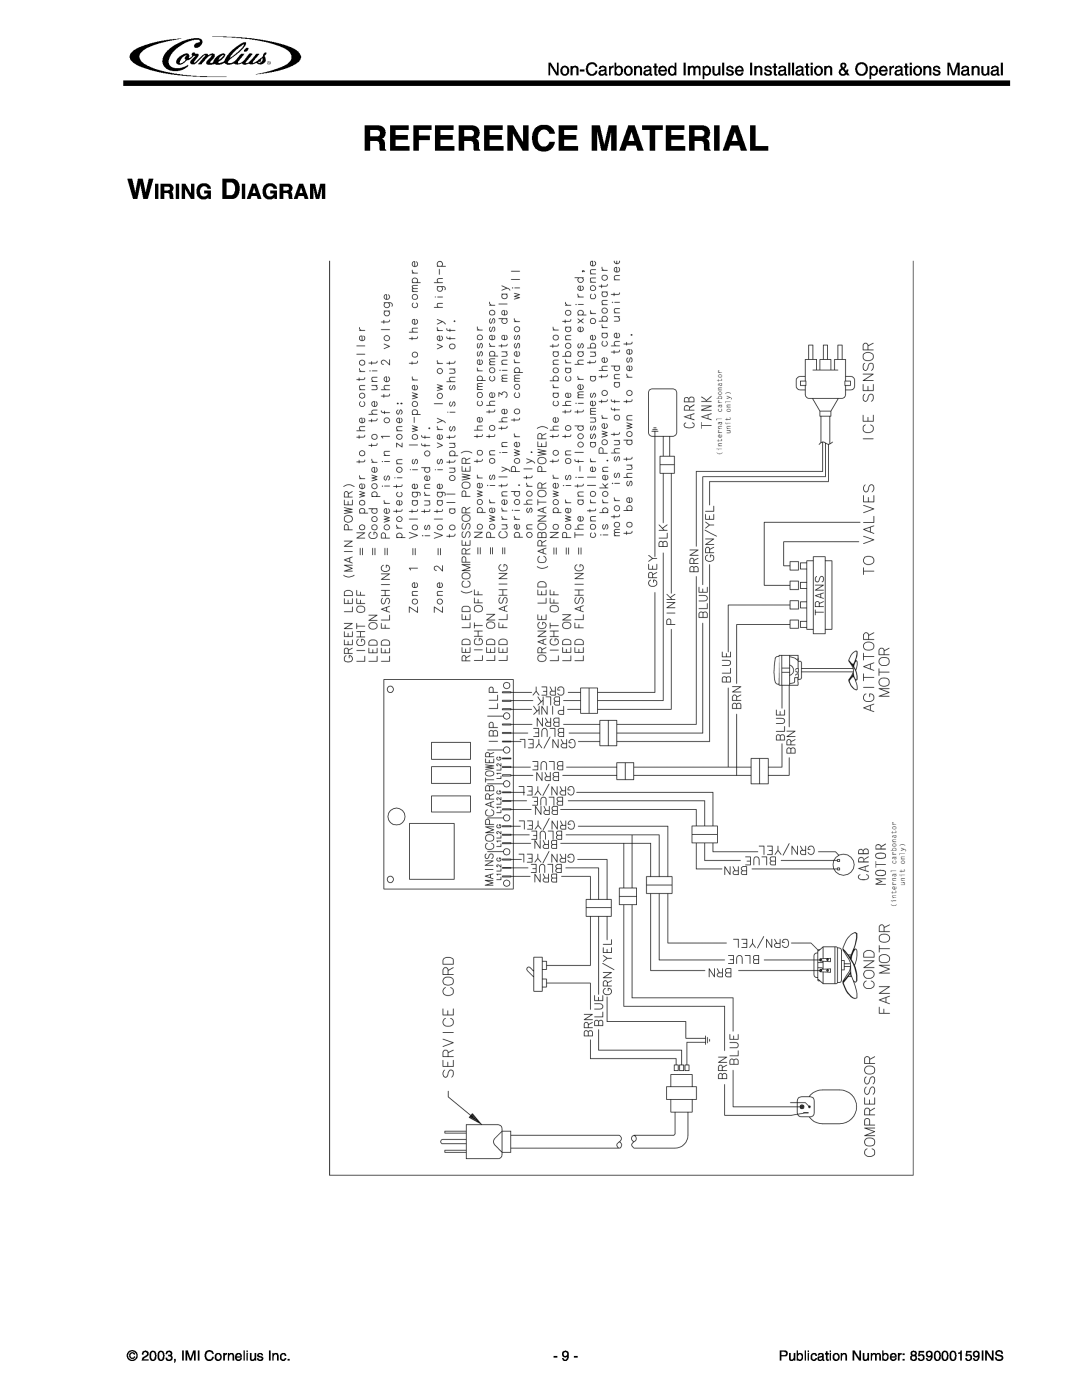 Cornelius Non-Carbonated Post-Mix Beverage Dispenser operation manual Reference Material, Wiring Diagram 